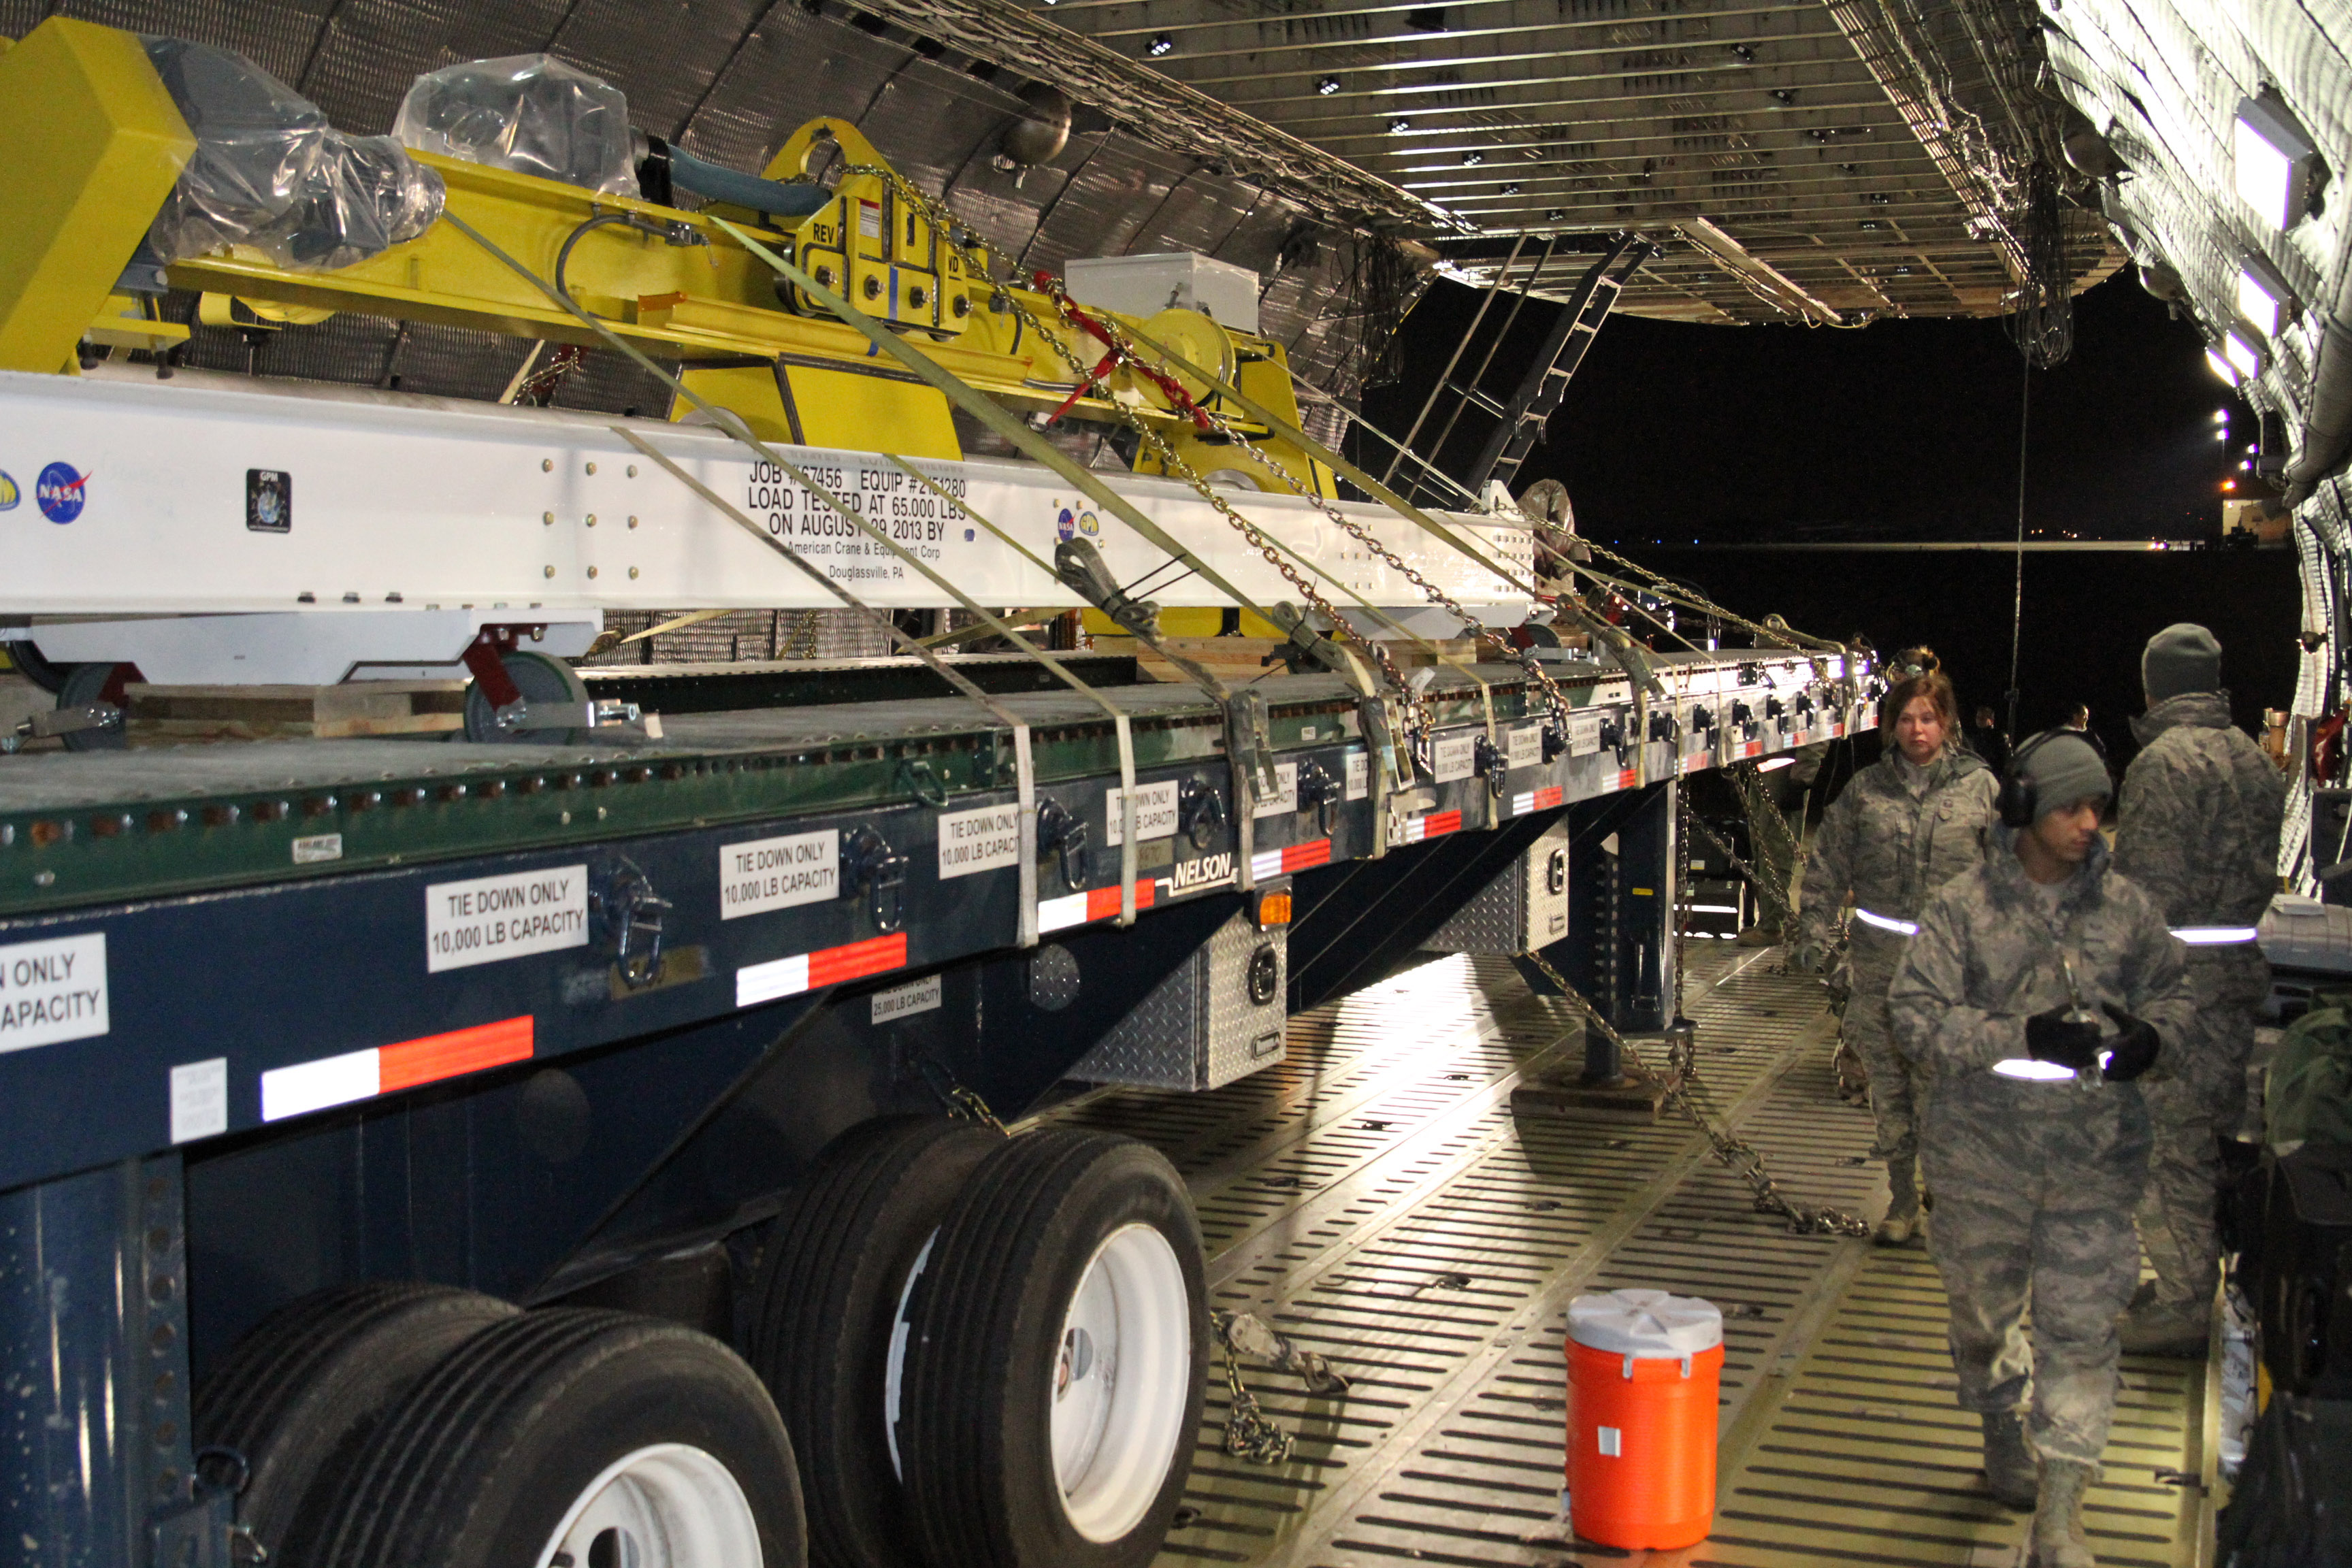 GPM's Roller Bed Truck Loaded on the Plane